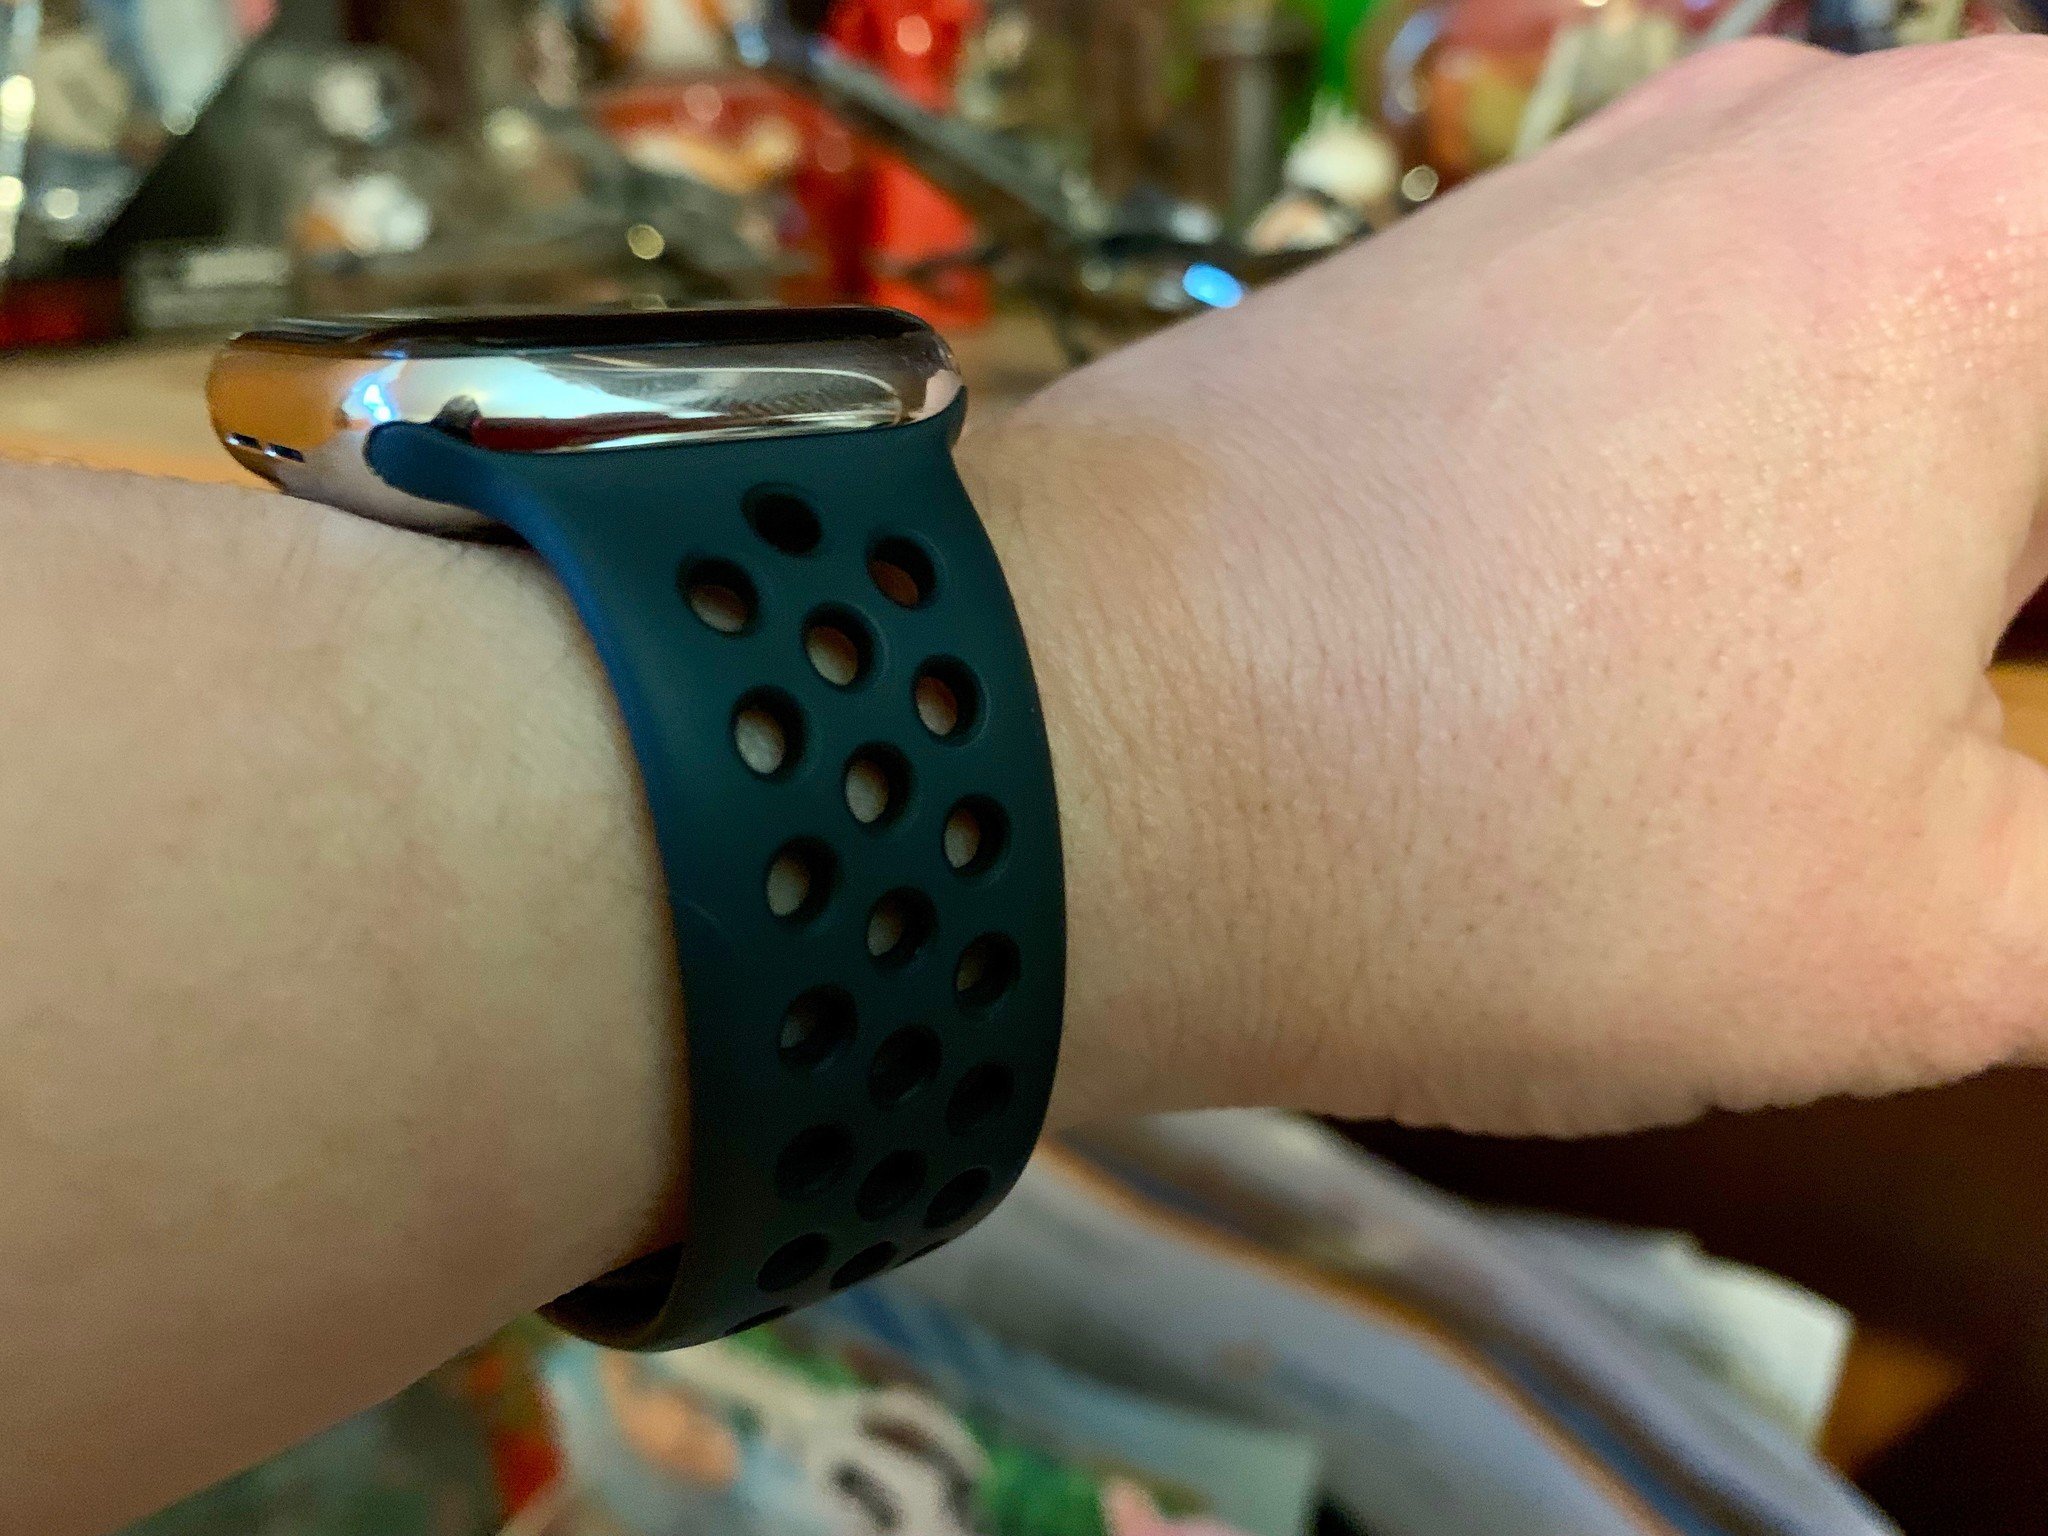 apple watch nike sport band review